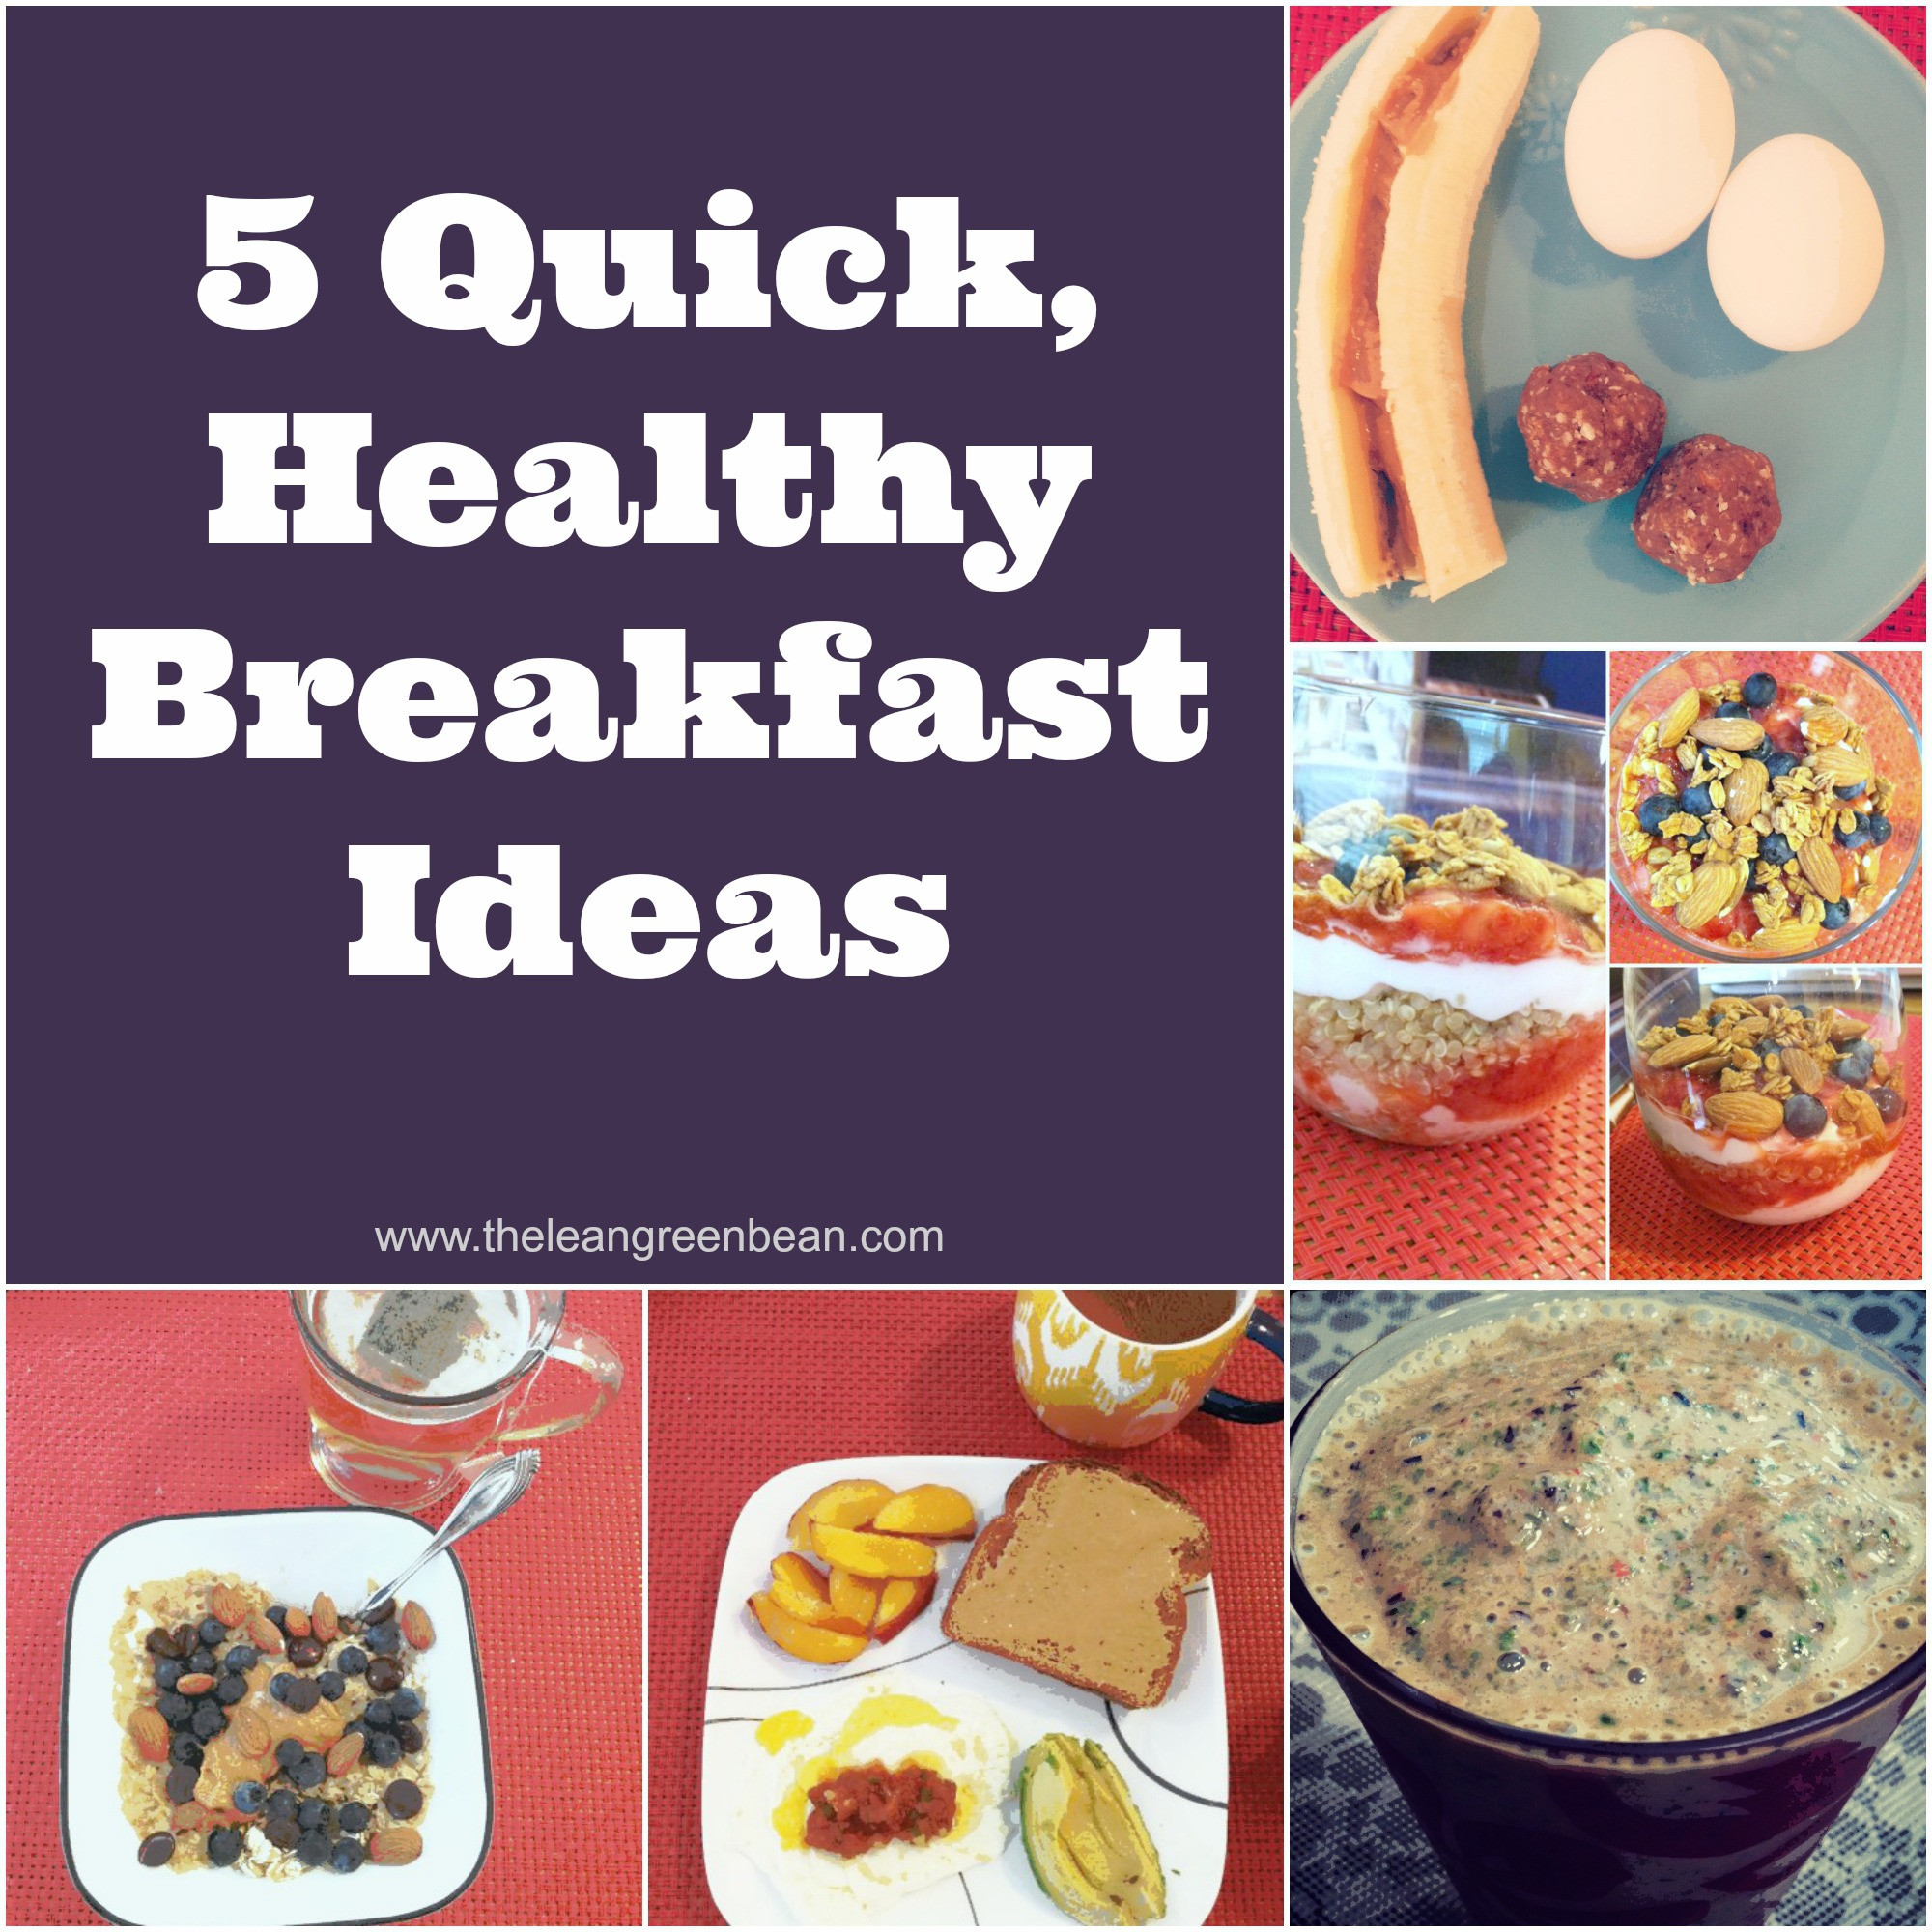 Quick And Healthy Breakfast
 5 Quick Healthy Breakfast Ideas from a Registered Dietitian